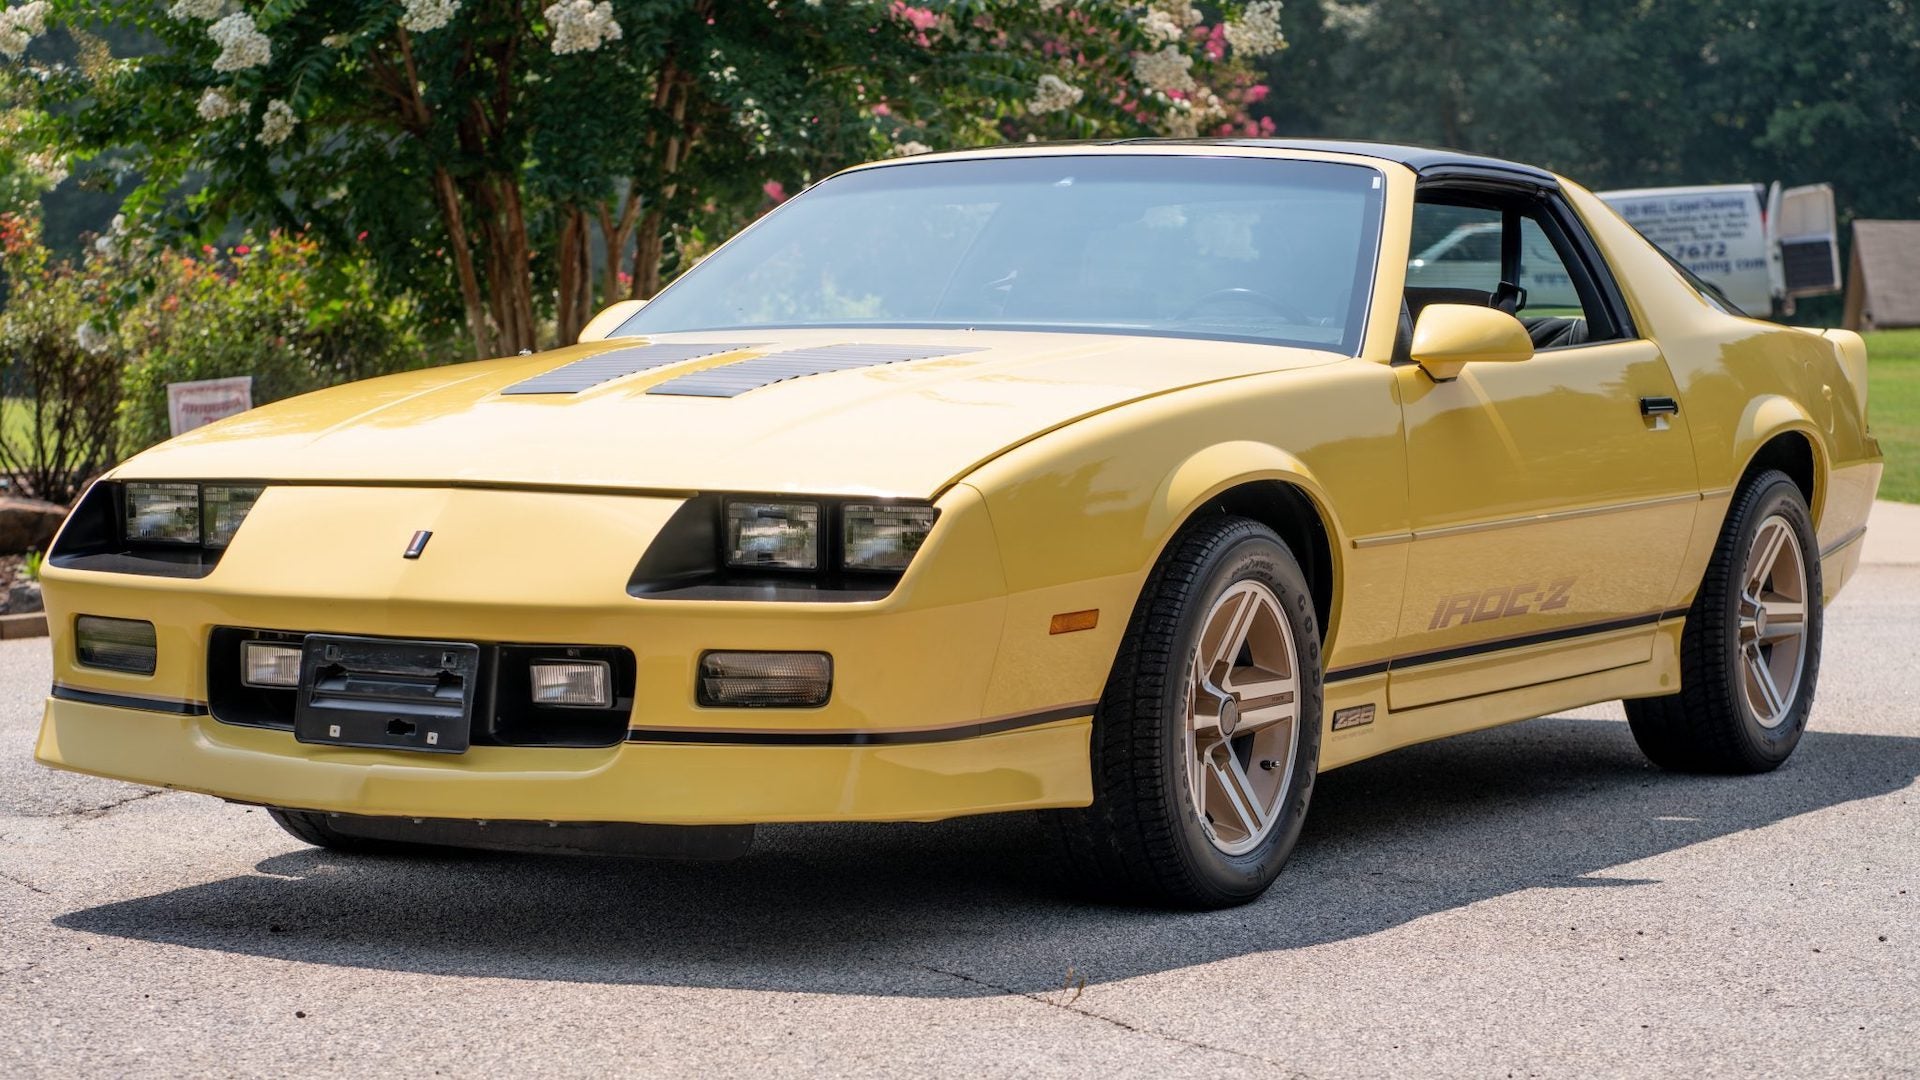 Don't Panic, but Someone Just Paid $56,000 for a 1987 Chevy Camaro